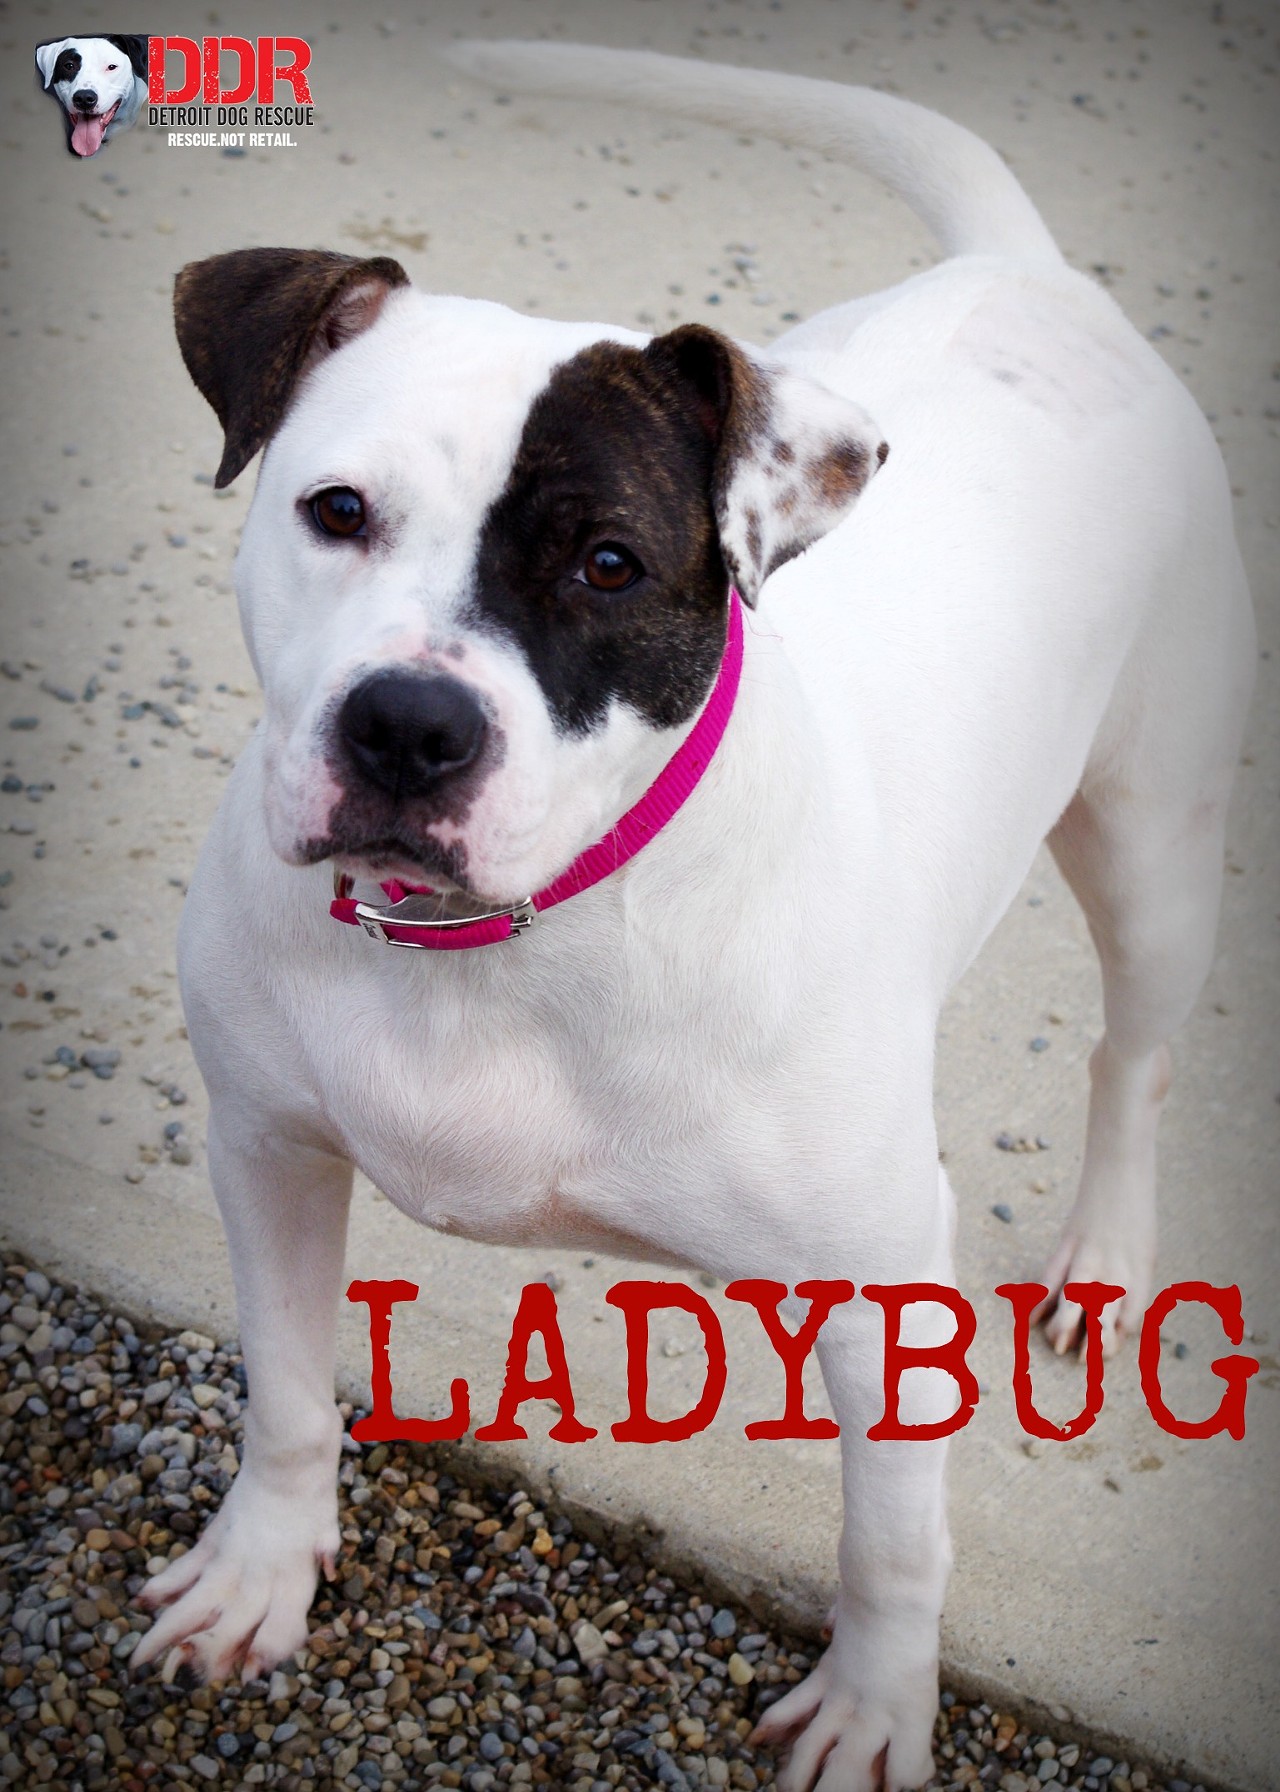 LadyBug loves to go on walks and even loves to swim she is a 2 year old Bulldog mix that prefers to be the only animal in the home.